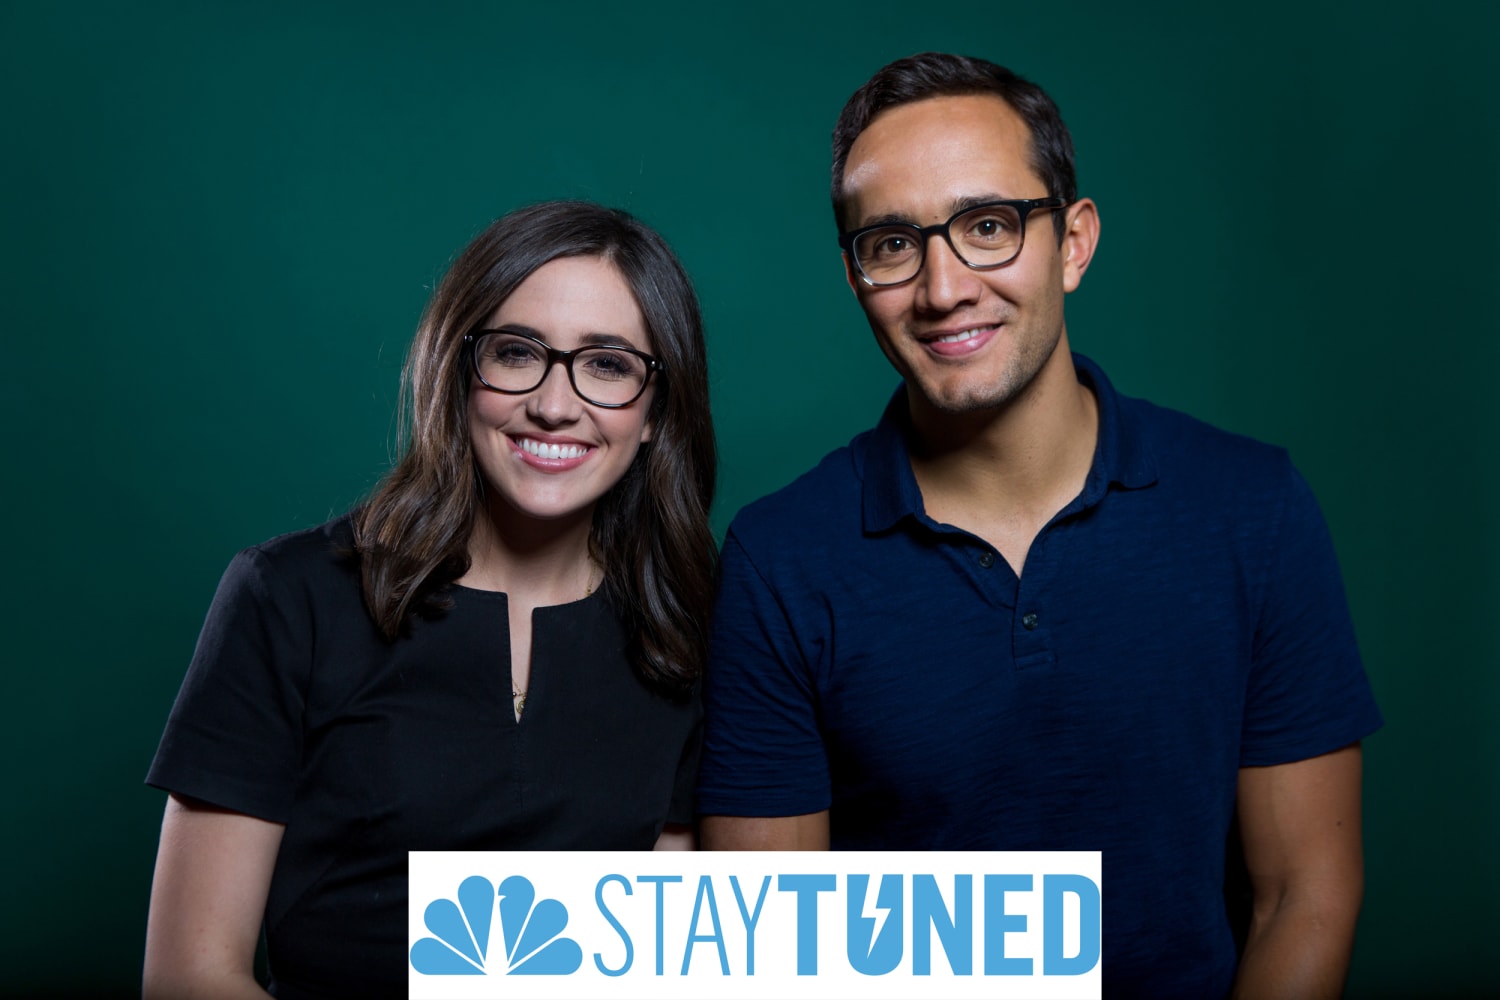 NBC News Launches 'Stay Tuned,' a Snapchat News Show